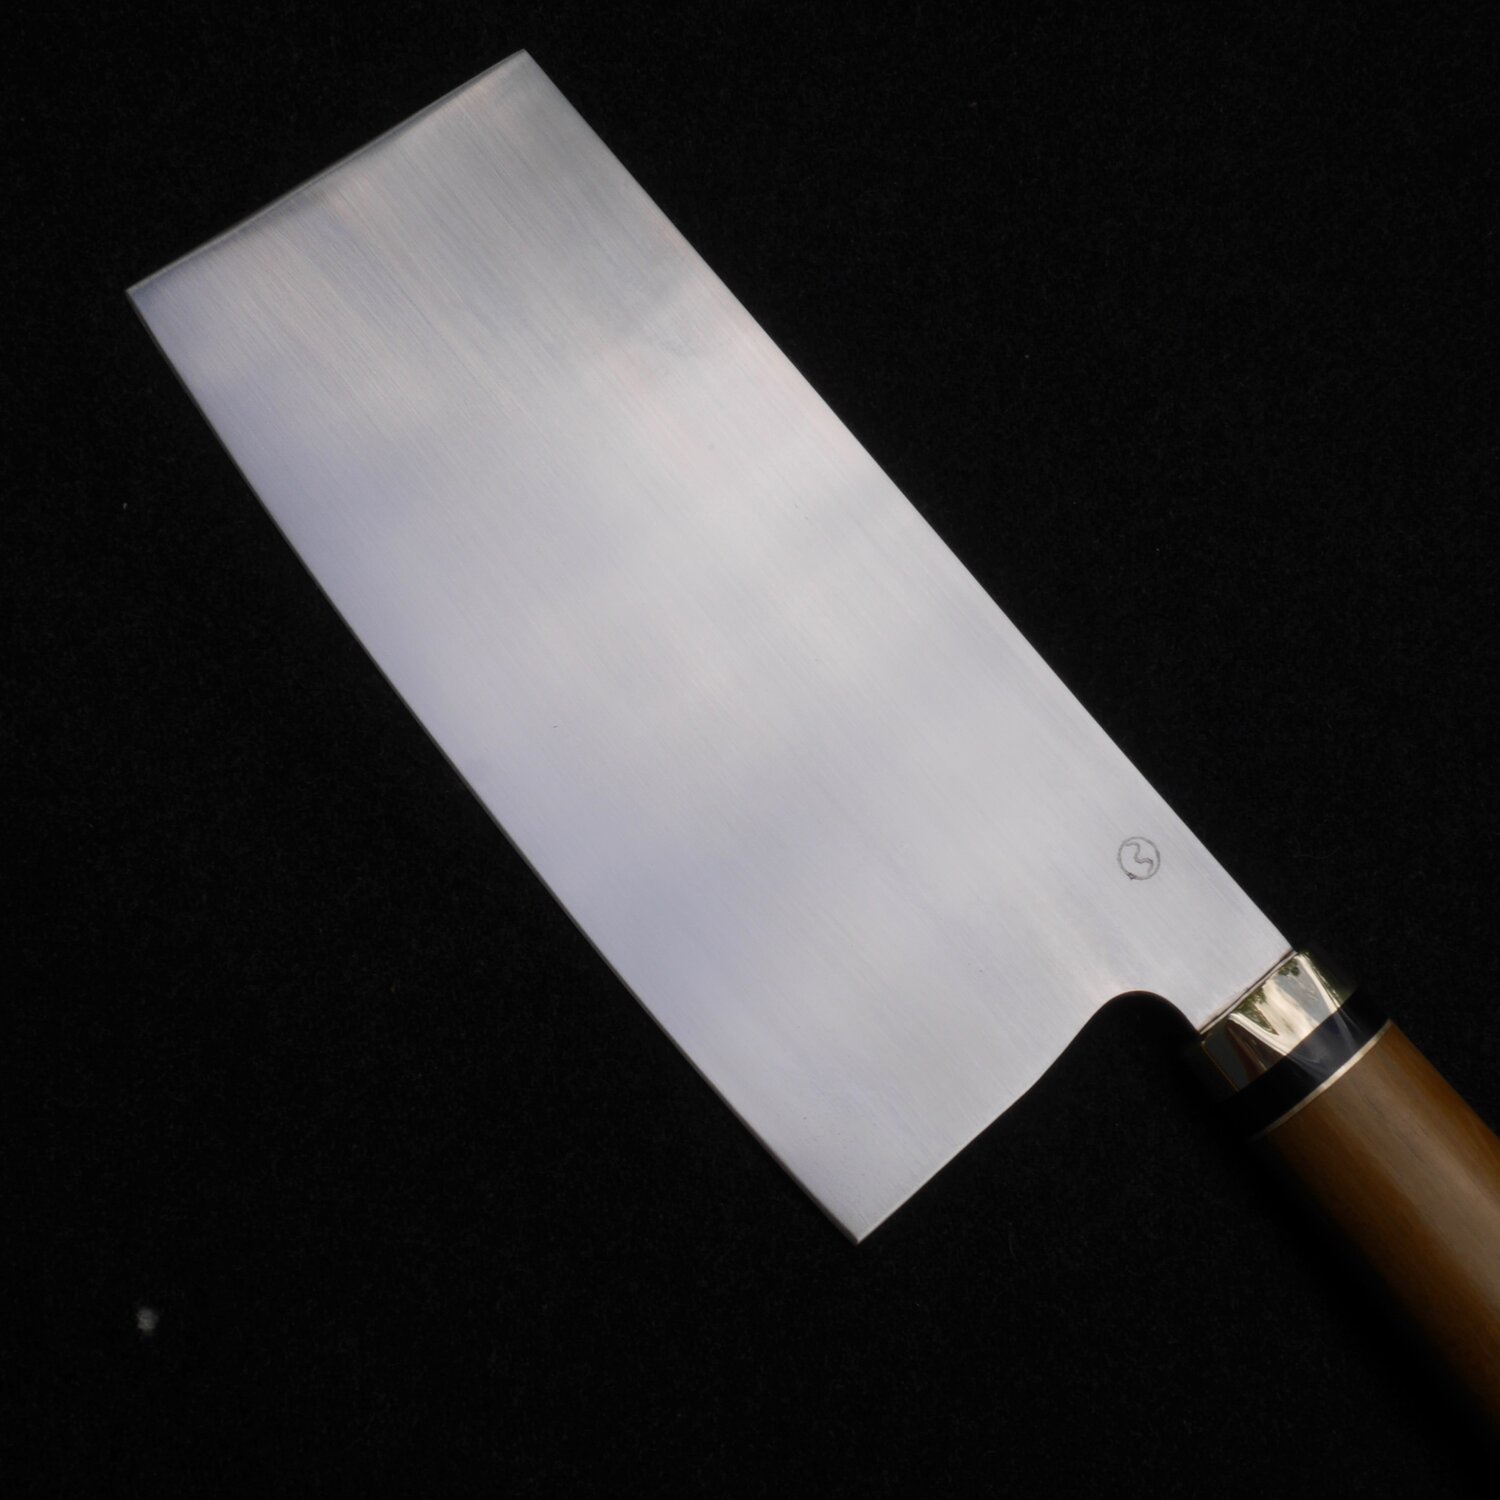 Chinese Cleaver — Moss Rock Cutlery